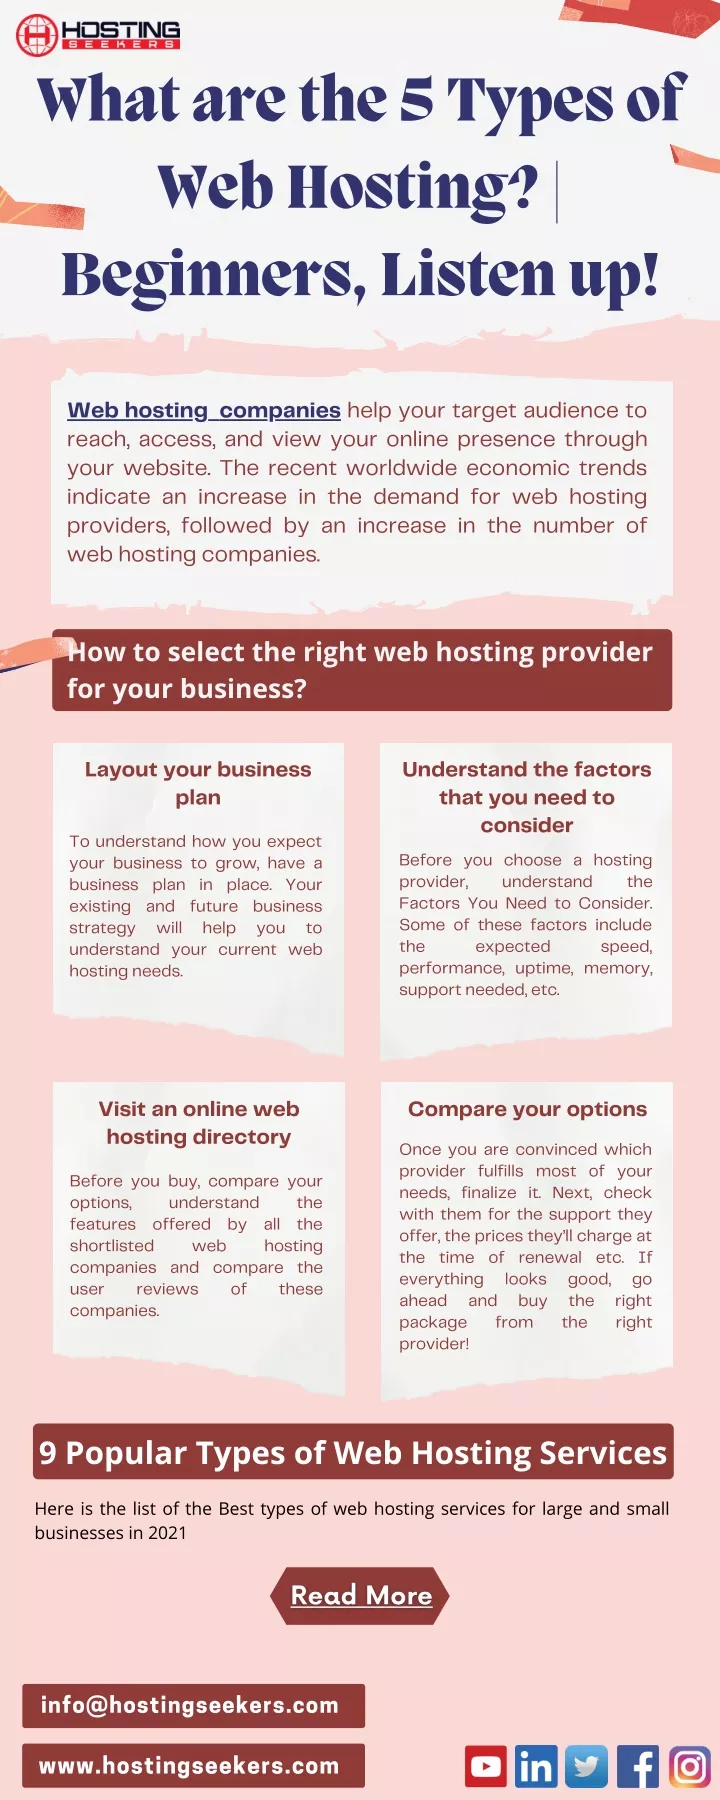 ppt-what-are-the-5-types-of-web-hosting-beginners-listen-up-powerpoint-presentation-id